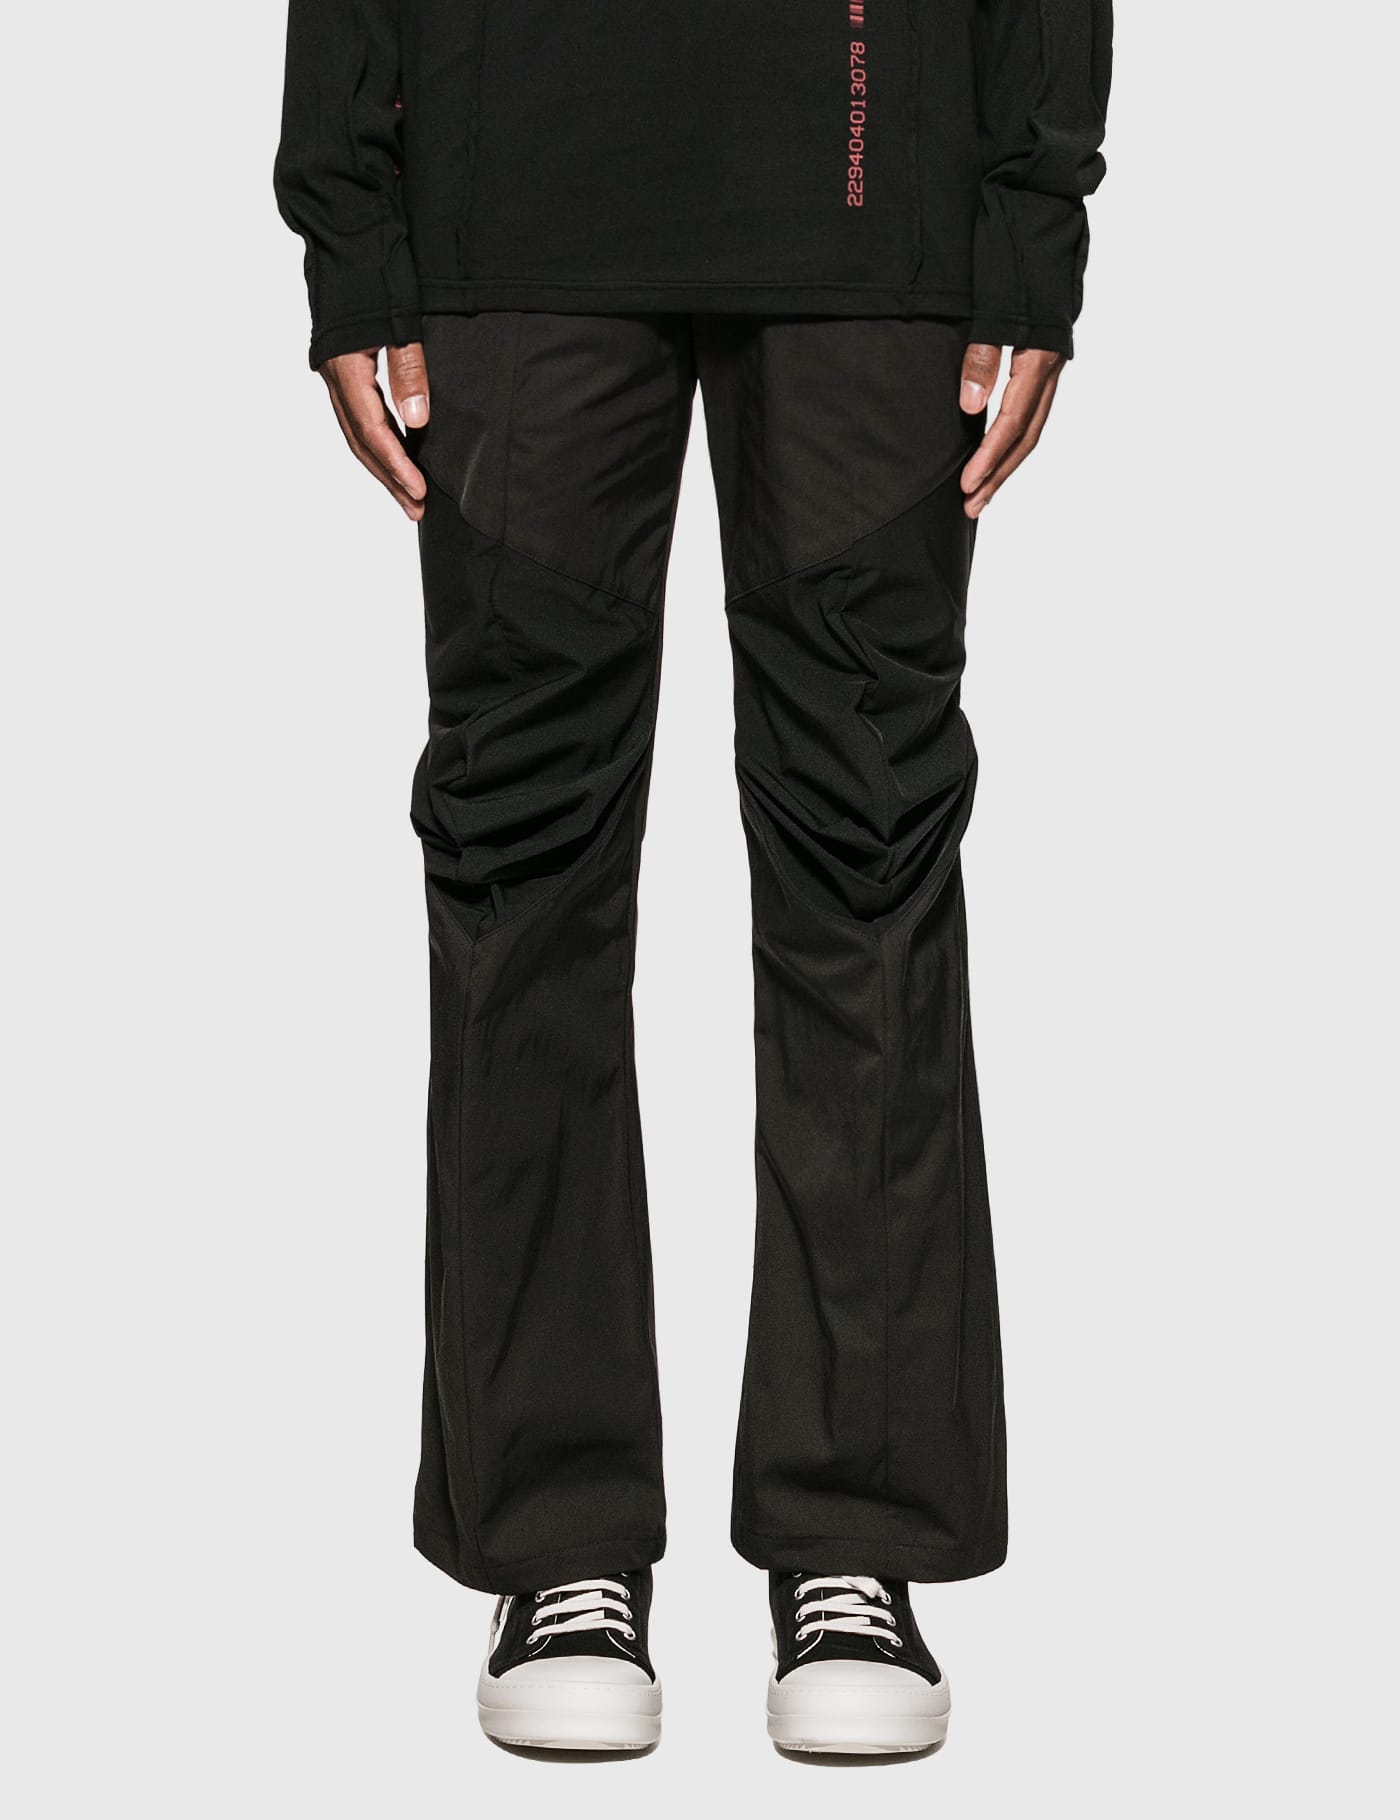 POST ARCHIVE FACTION (PAF) - 3.1 Technical Pants Right | HBX - Globally  Curated Fashion and Lifestyle by Hypebeast